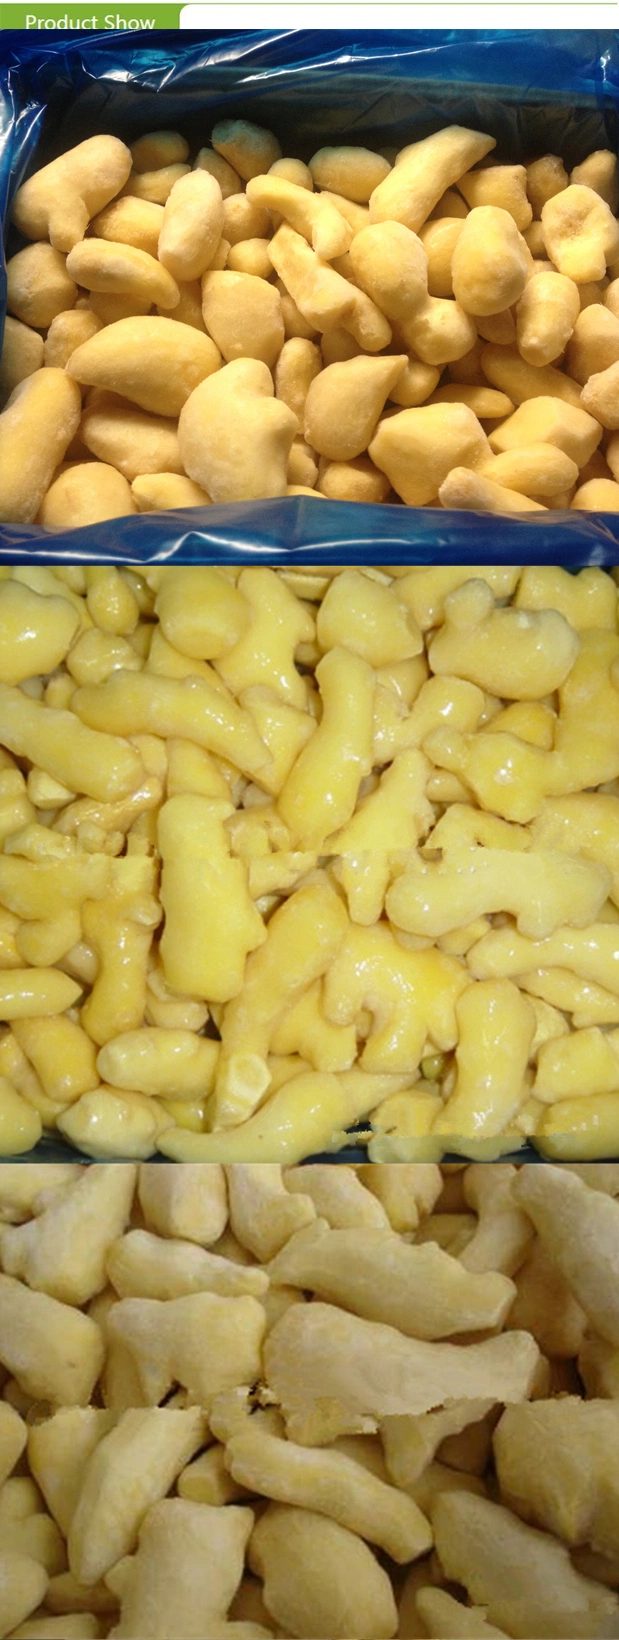 IQF Frozen Pleed Ginger with High Quality